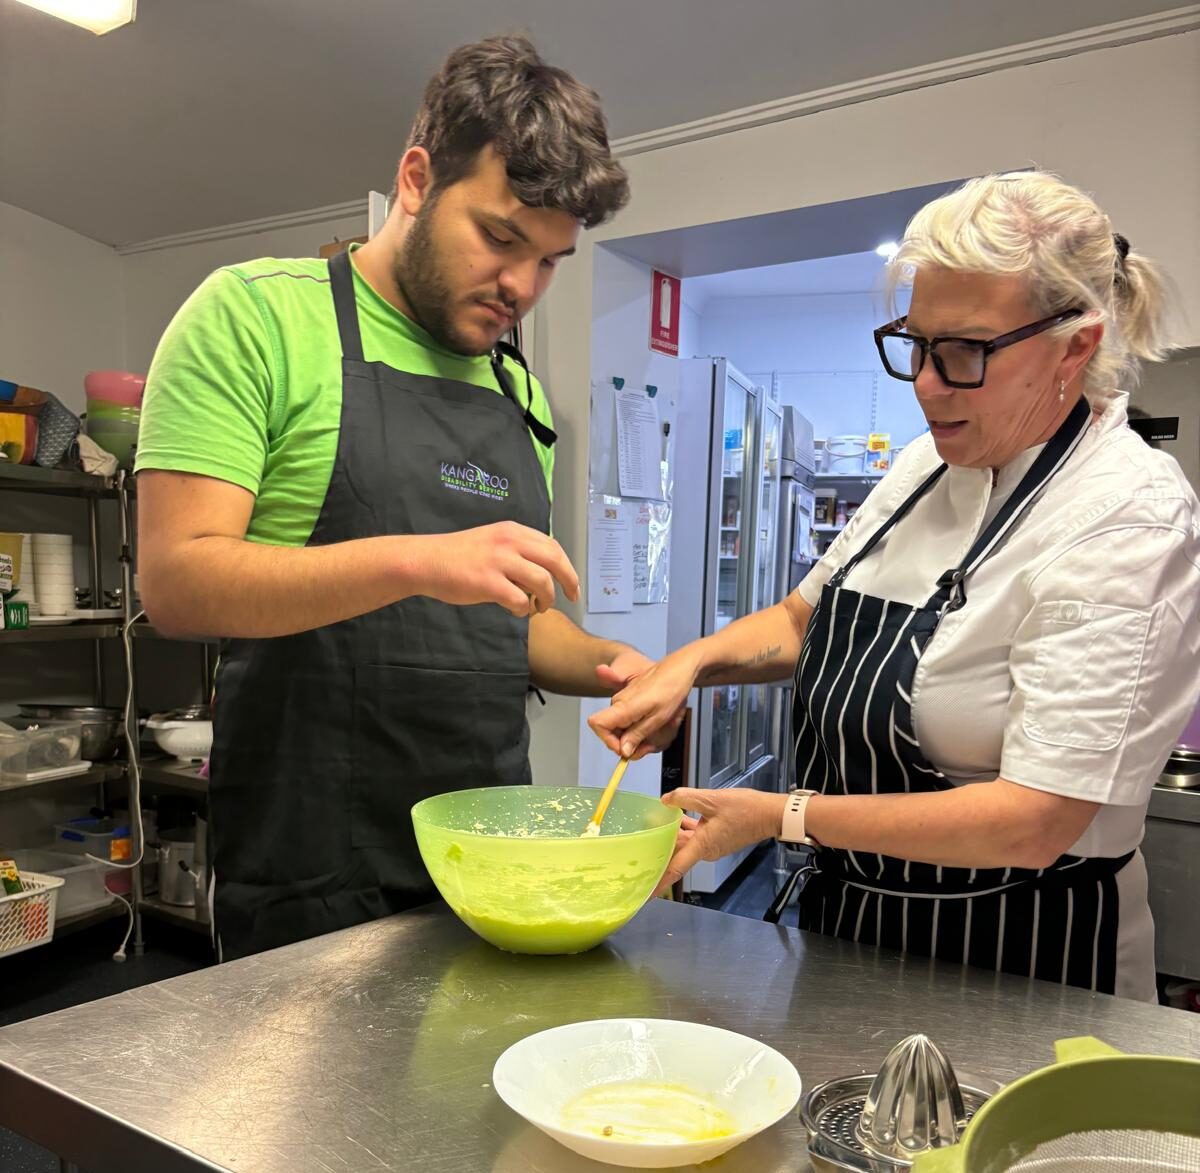 Two People In A Kitchen, One Wearing A Green Shirt And Black Apron Stirring Contents In A Green Bowl, While The Other, Wearing Glasses And A Black Striped Apron, Assists. A Juicer, Bowl, And Other Kitchen Tools Are On The Stainless Steel Counter During Their Week 2 Cooking Classes At Kds.